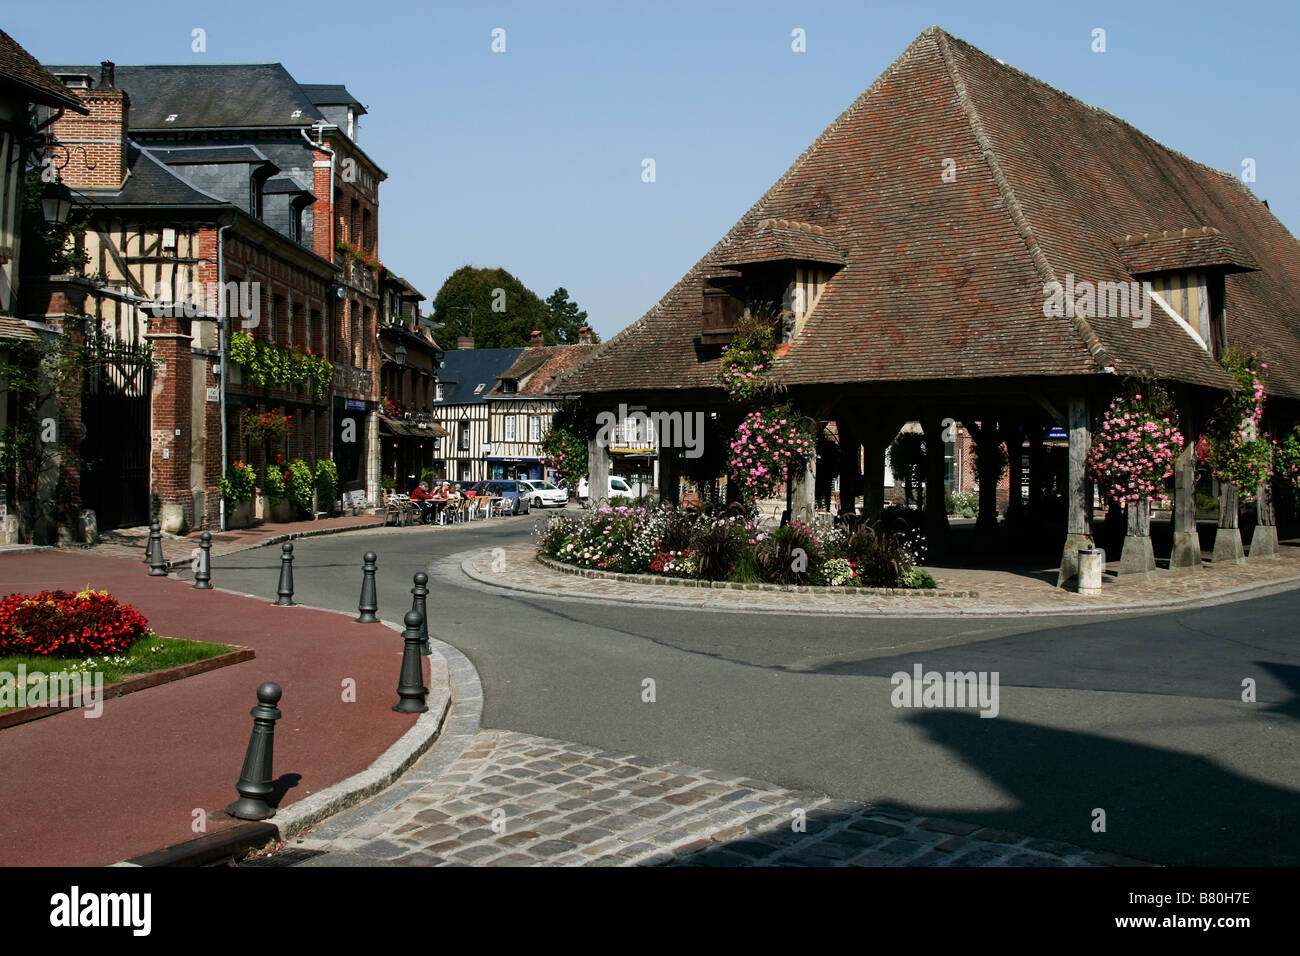 Lyons-la-foret, a village in Normandy France. Stock Photo